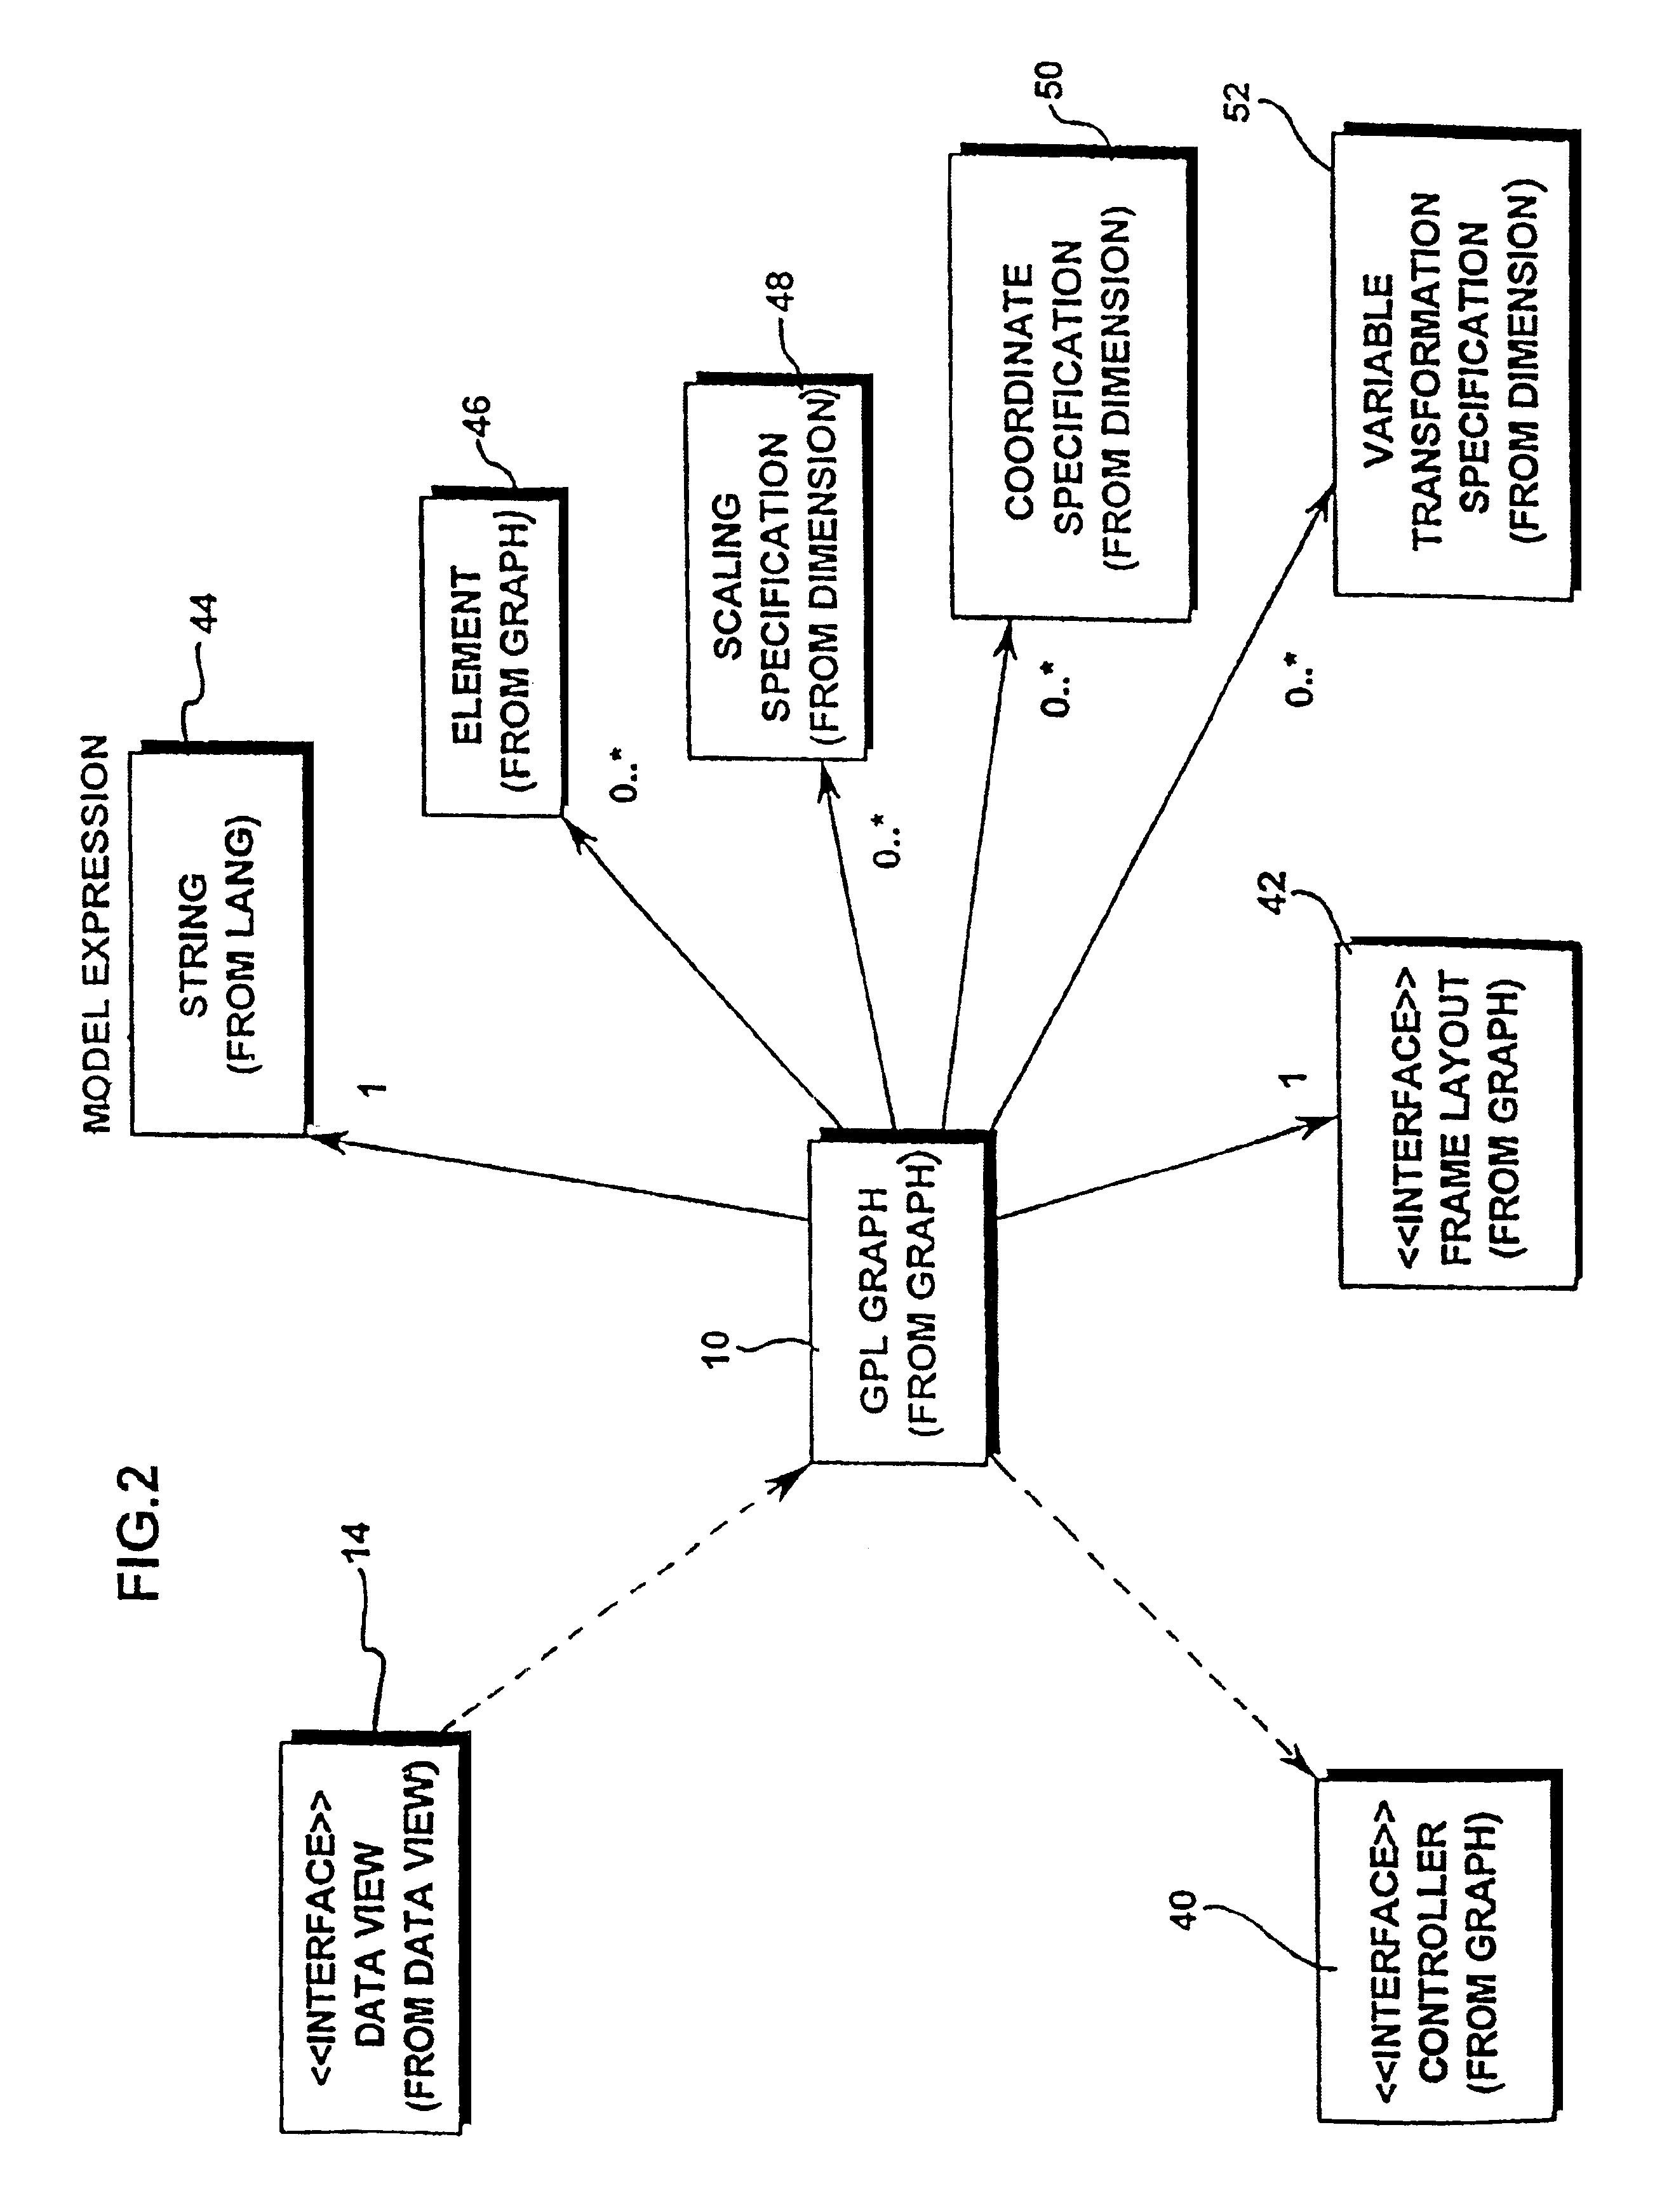 Computer method and apparatus for creating visible graphics by using a graph algebra